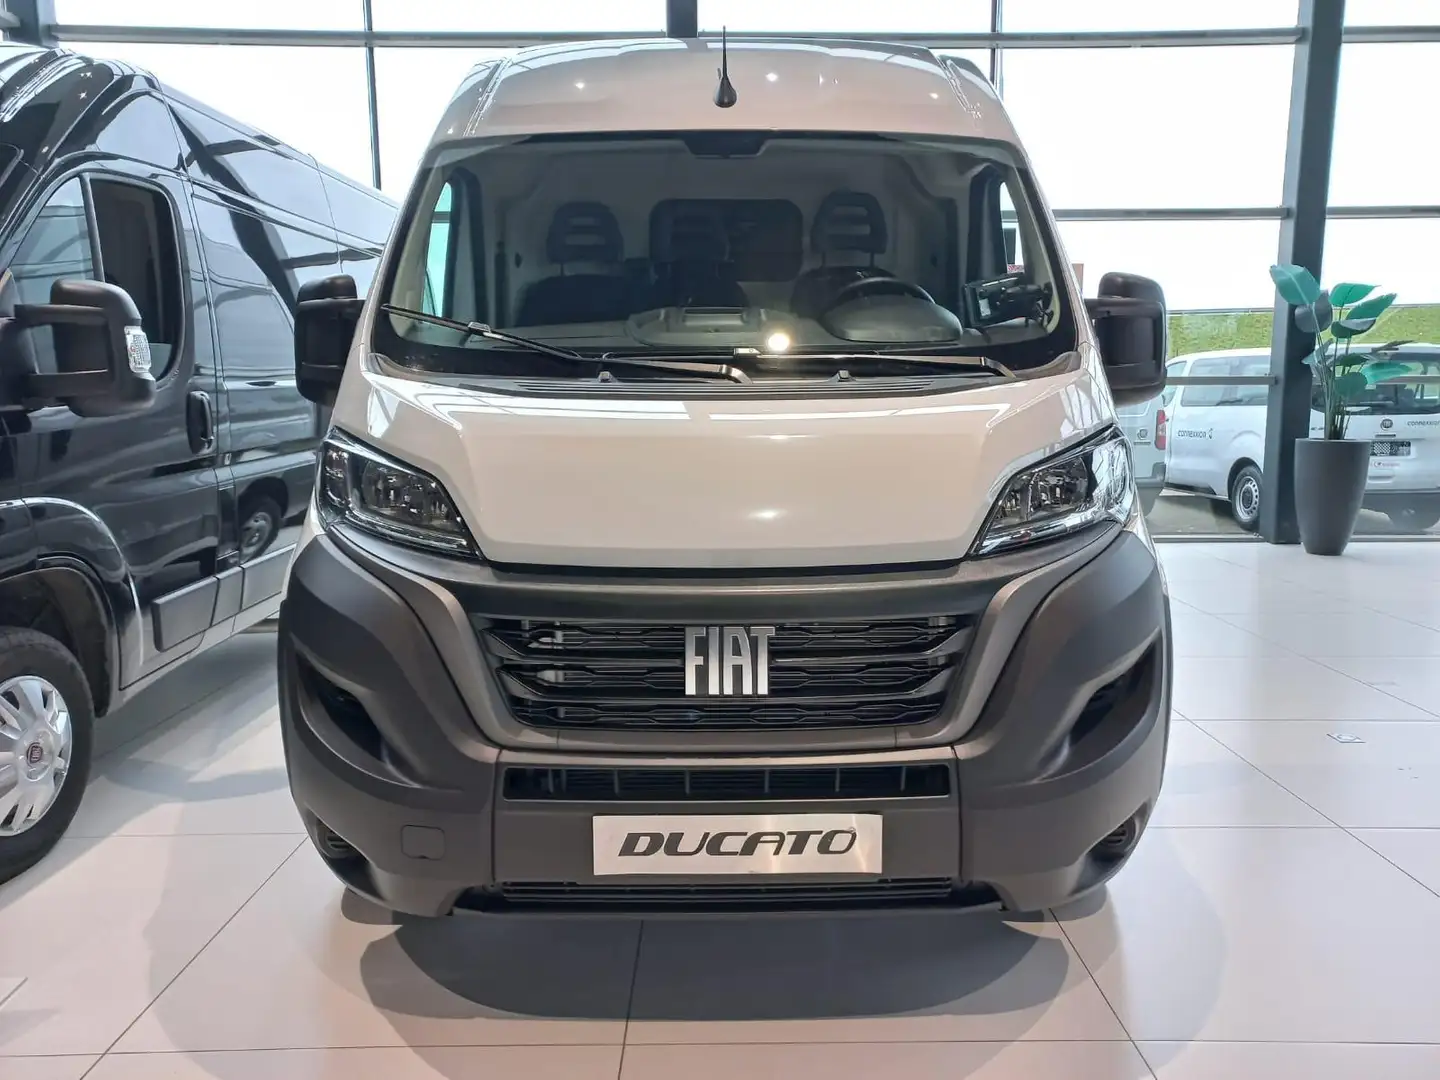 Fiat Ducato E-Ducato 3.5T L2H2 79 kWh | 11kw On board Charger - 2